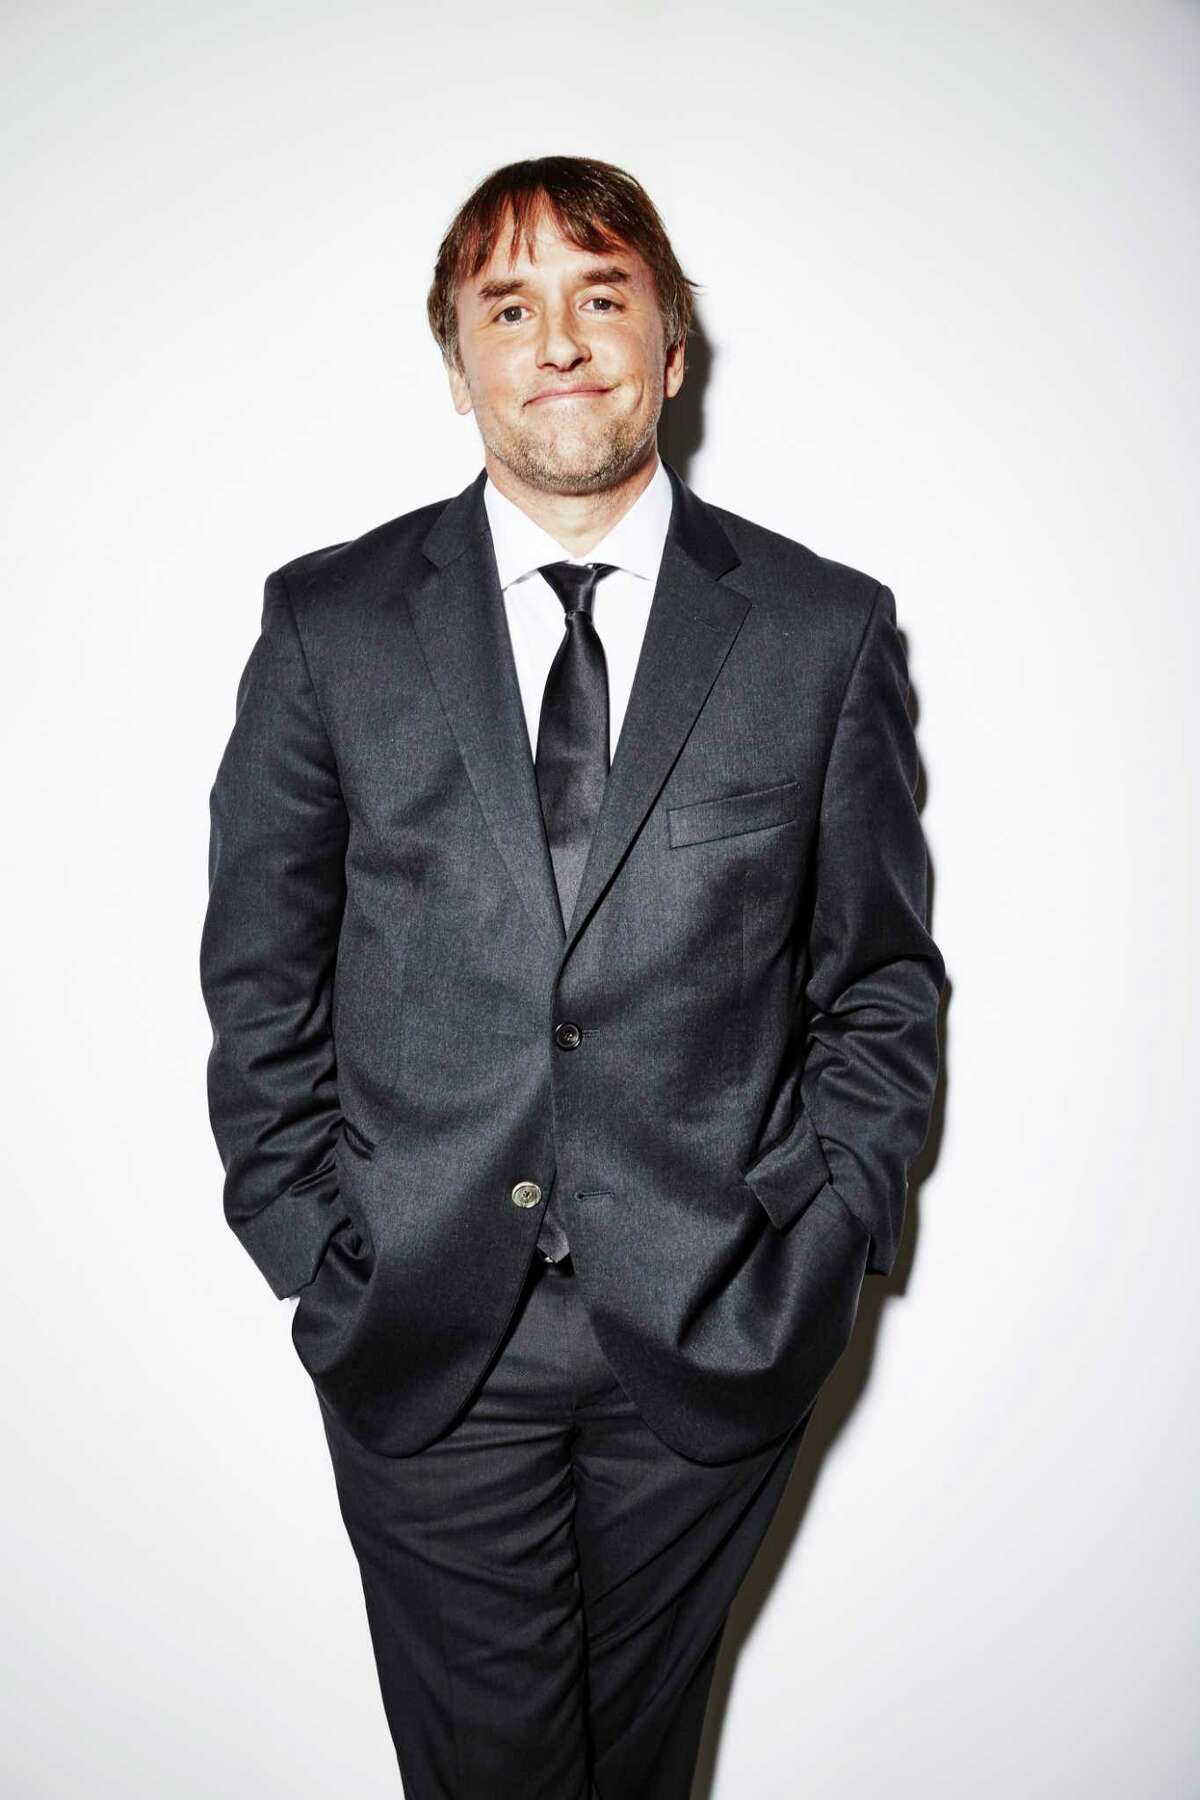 Director Richard Linklater poses for a portrait at the 17th Costume Designers Guild Awards on February 24, 2015 in Beverly Hills, California.